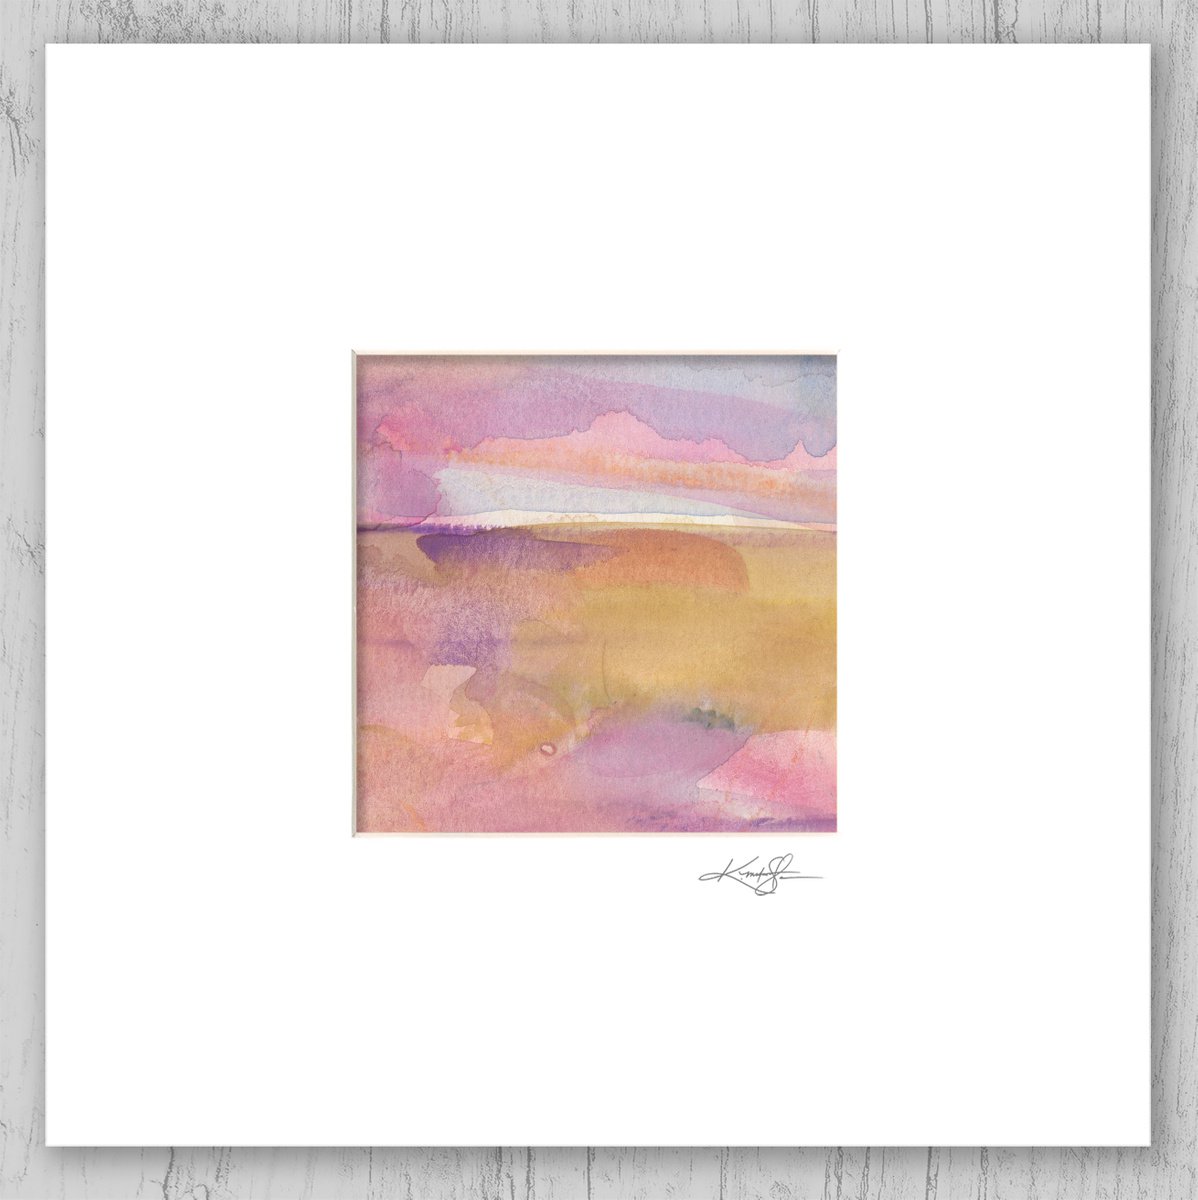 A Mystic Dream Journey - Small Abstract Landscape Painting by Kathy Morton Stanion by Kathy Morton Stanion